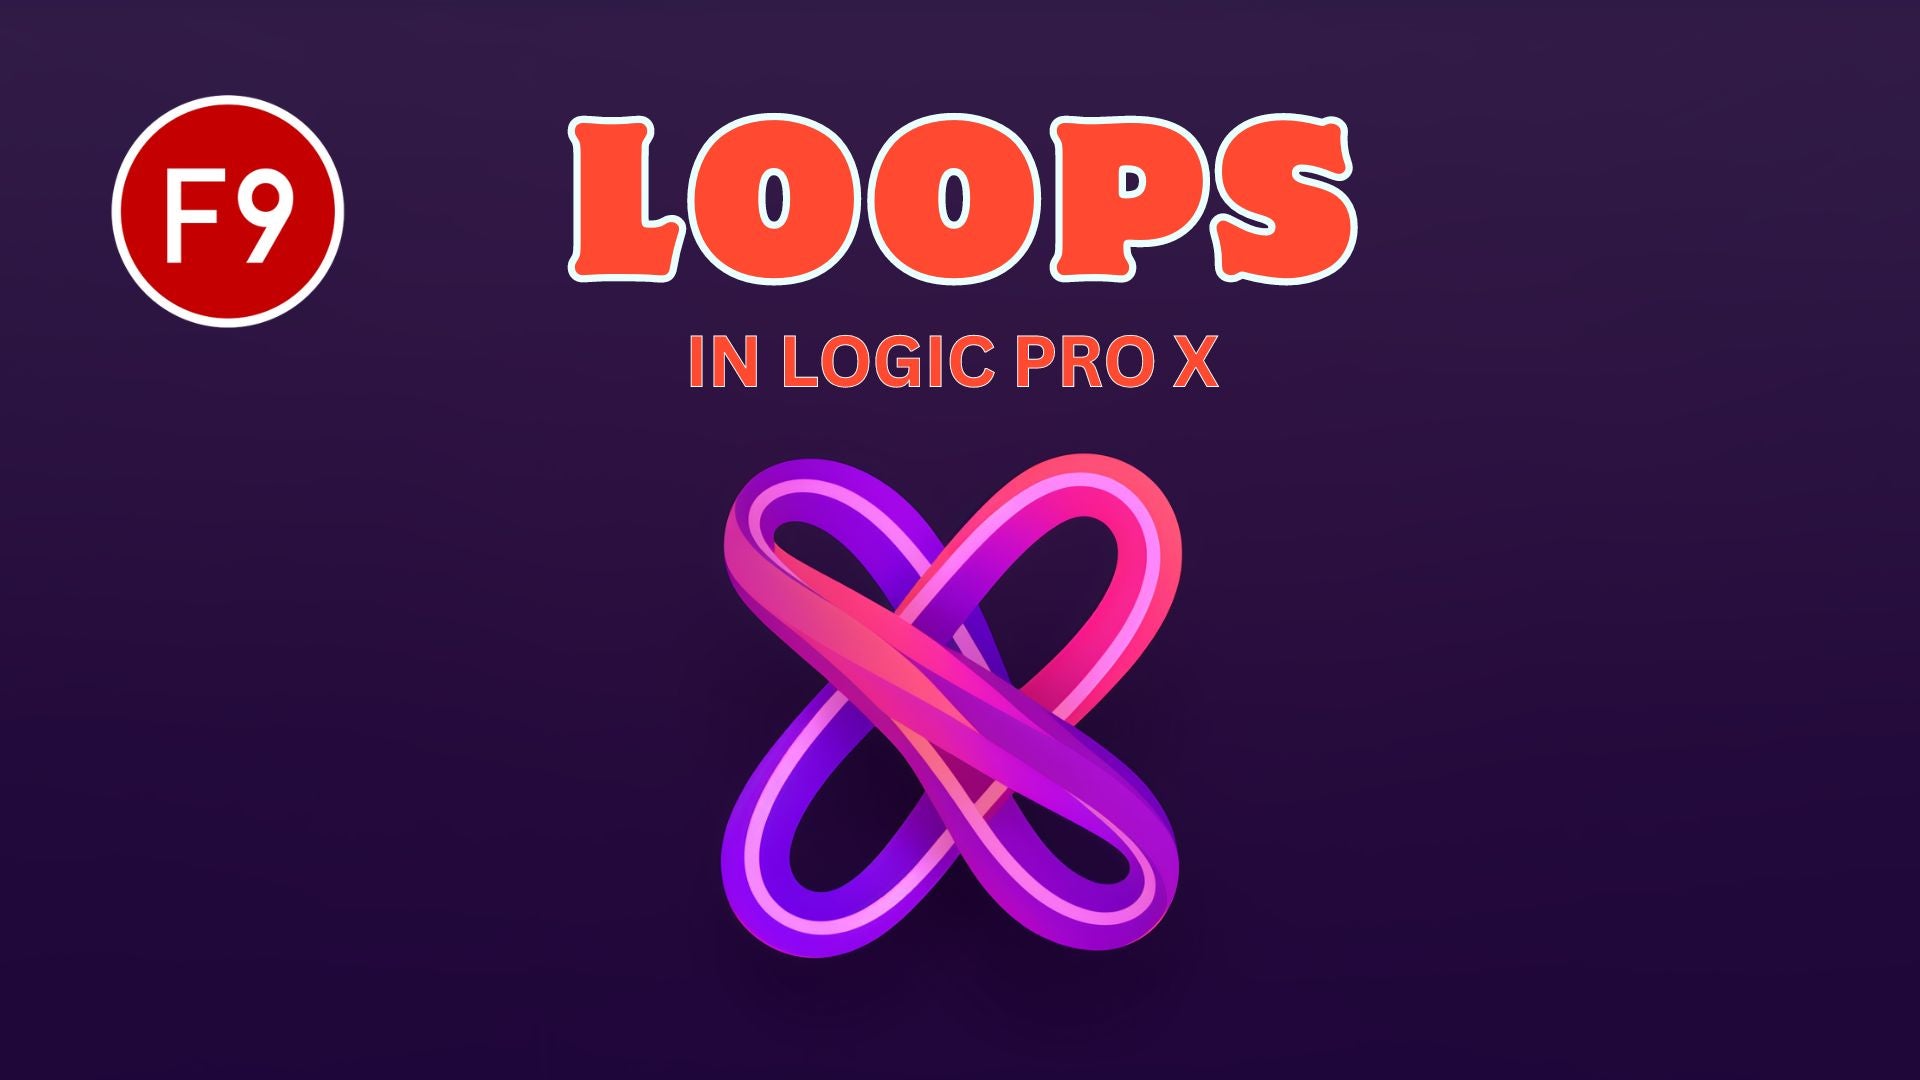 Use loops in Logic just like Ableton